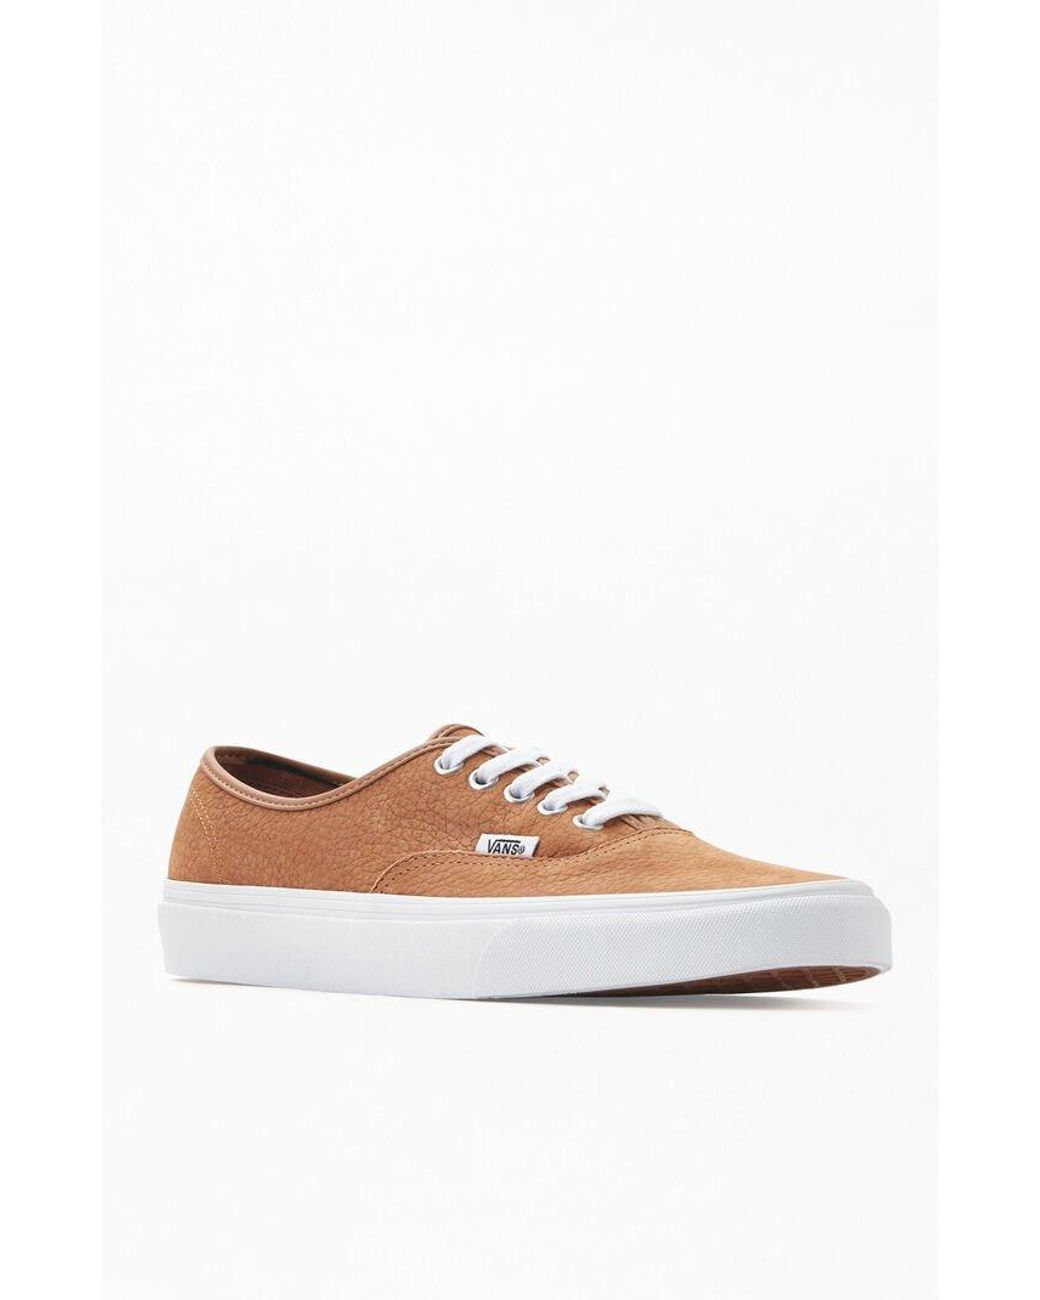 Vans Os Grain Leather Authentic Shoes in Camel (Brown) for Men | Lyst